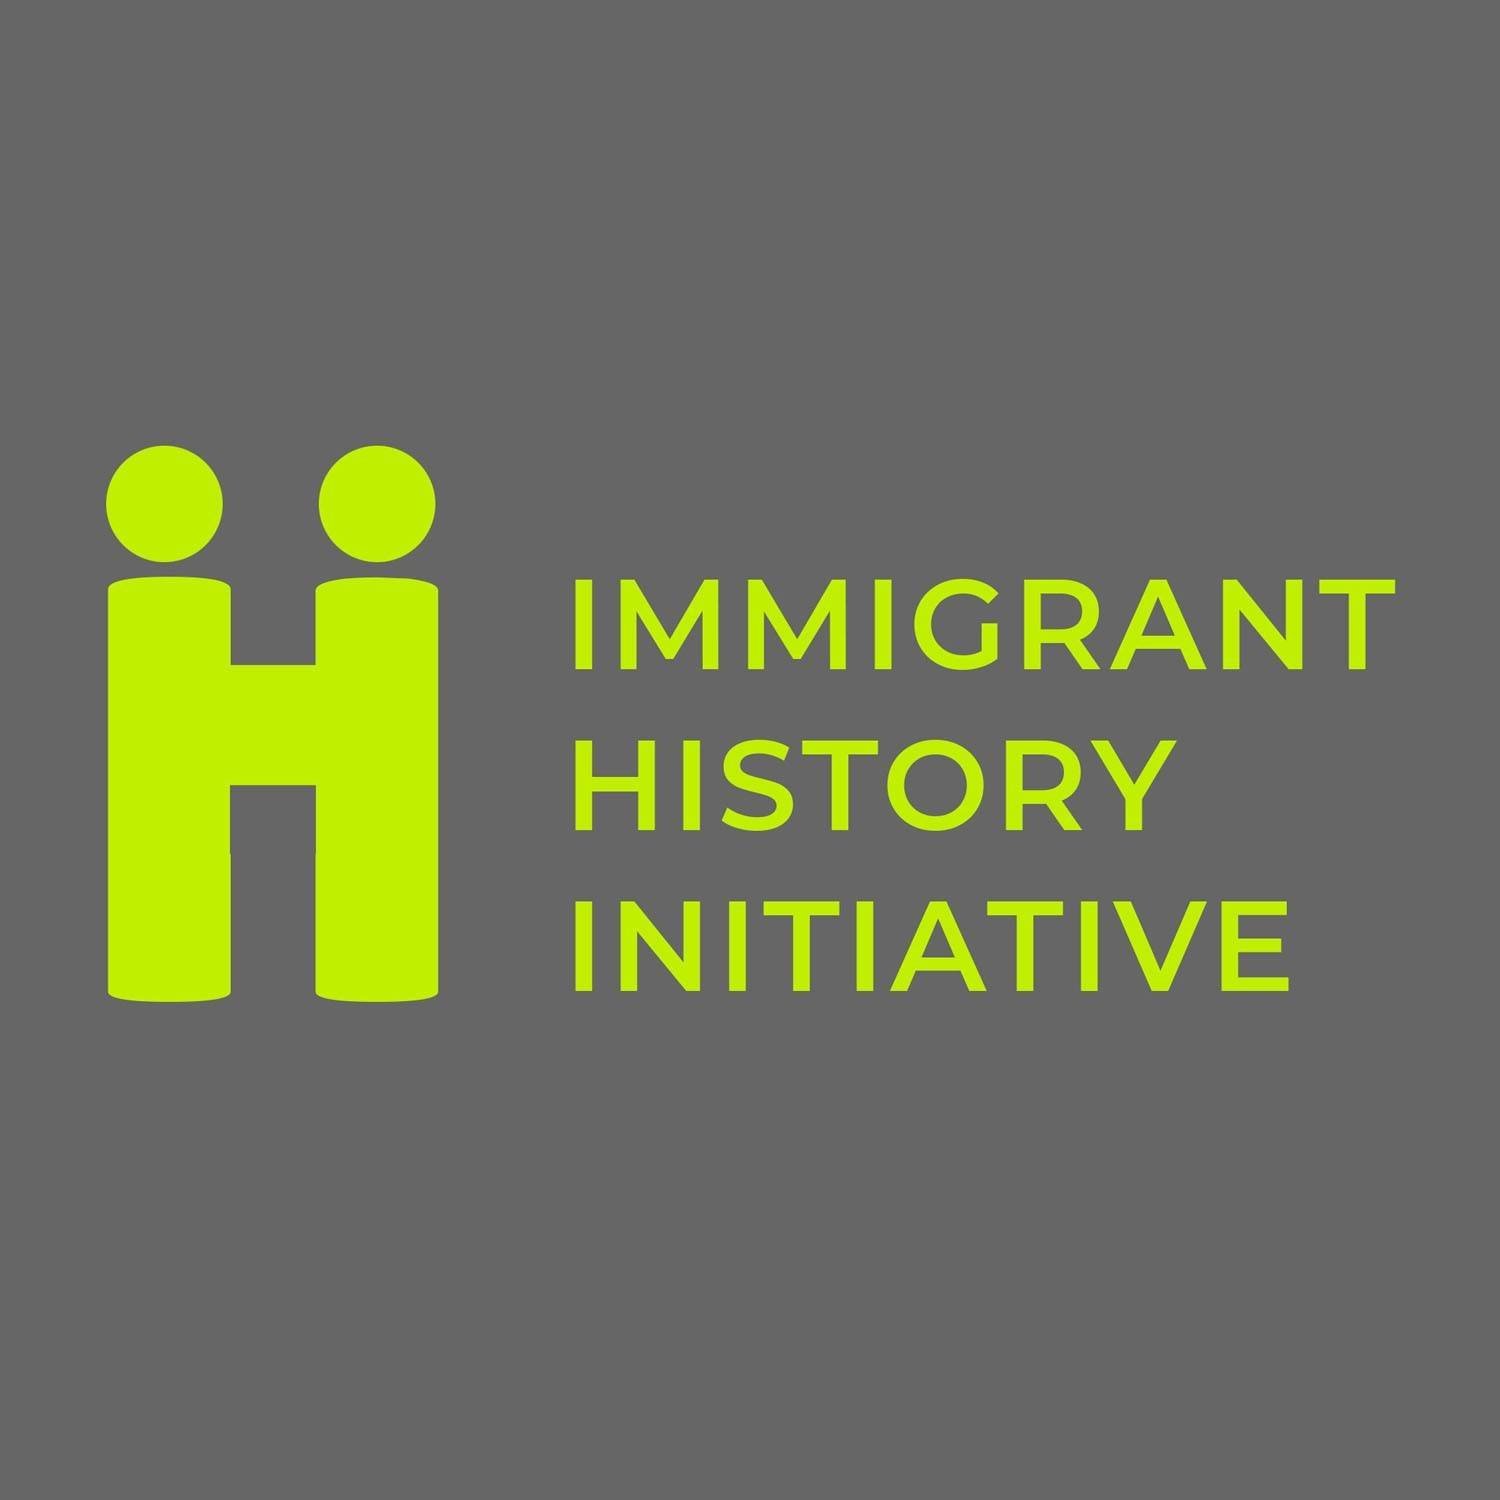 IHI seeks to educate and empower communities through the untold stories of immigrant diasporas in America. Follows/likes/retweets are not endorsements